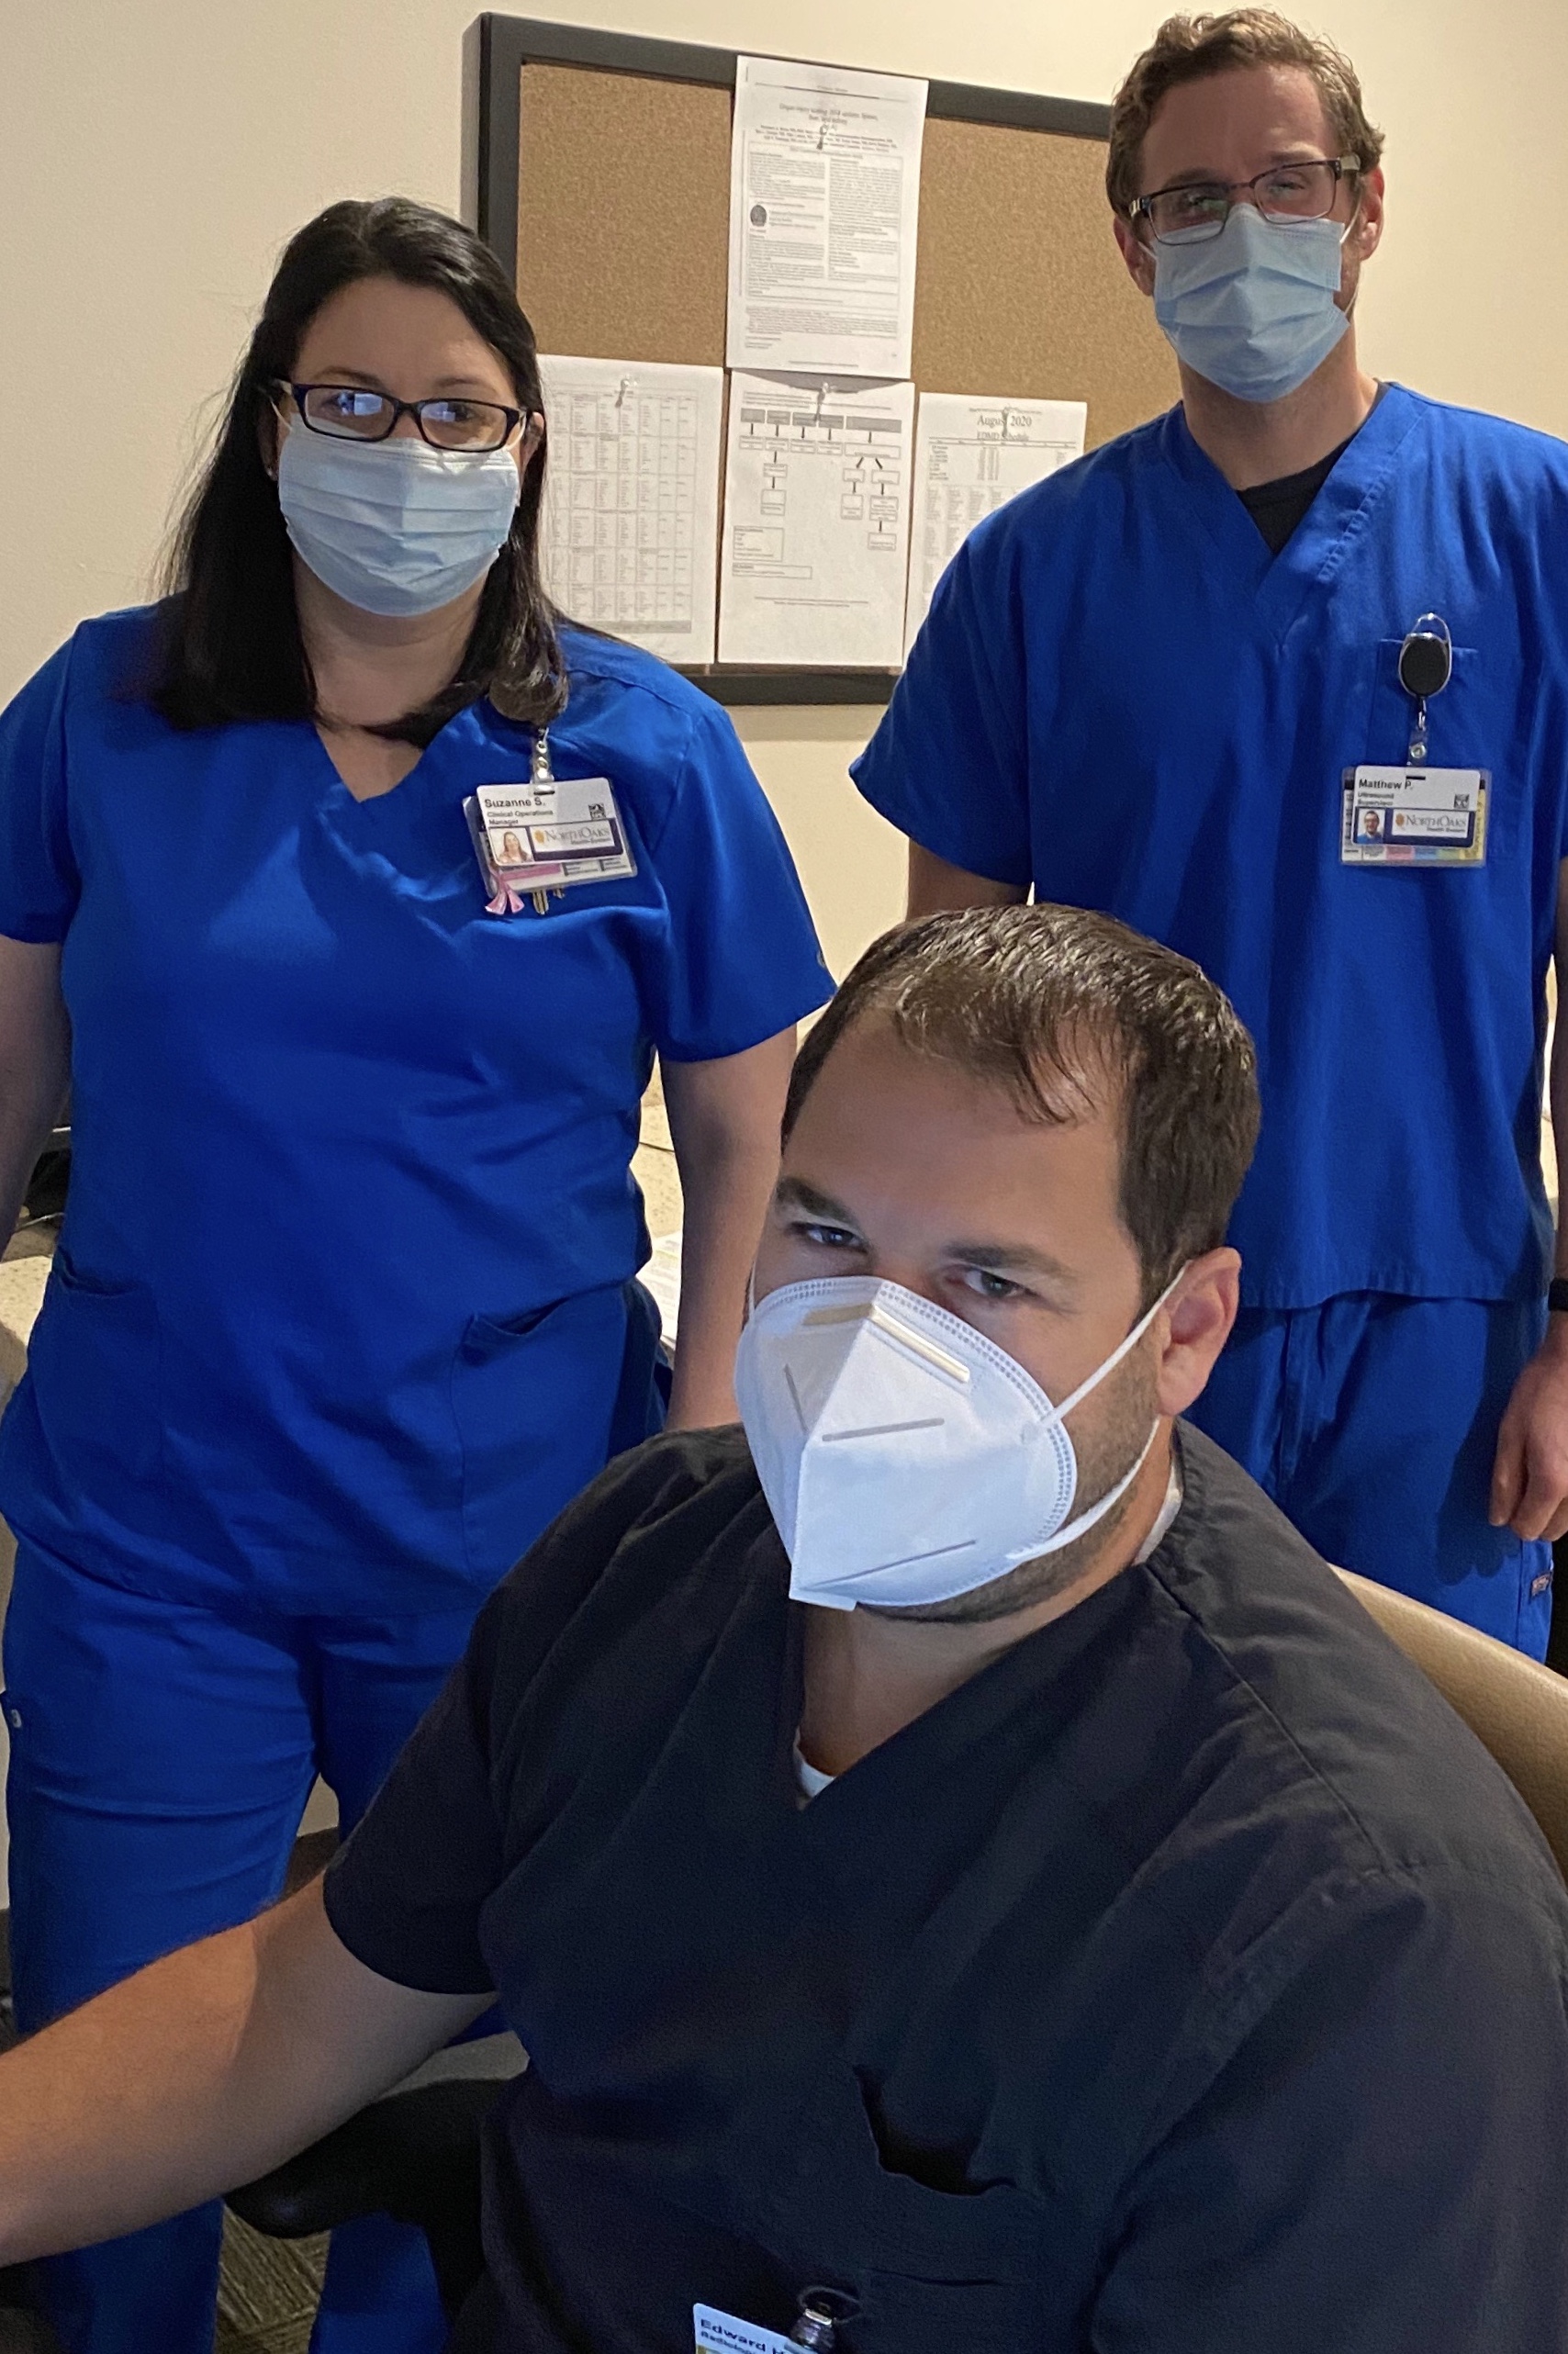 Clockwise, from left, are Diagnostics Clinical Operations Manager Suzanne Smith, Ultrasound Supervisor Matthew Peralta and Diagnostics Medical Director Edward Hernandez, MD.